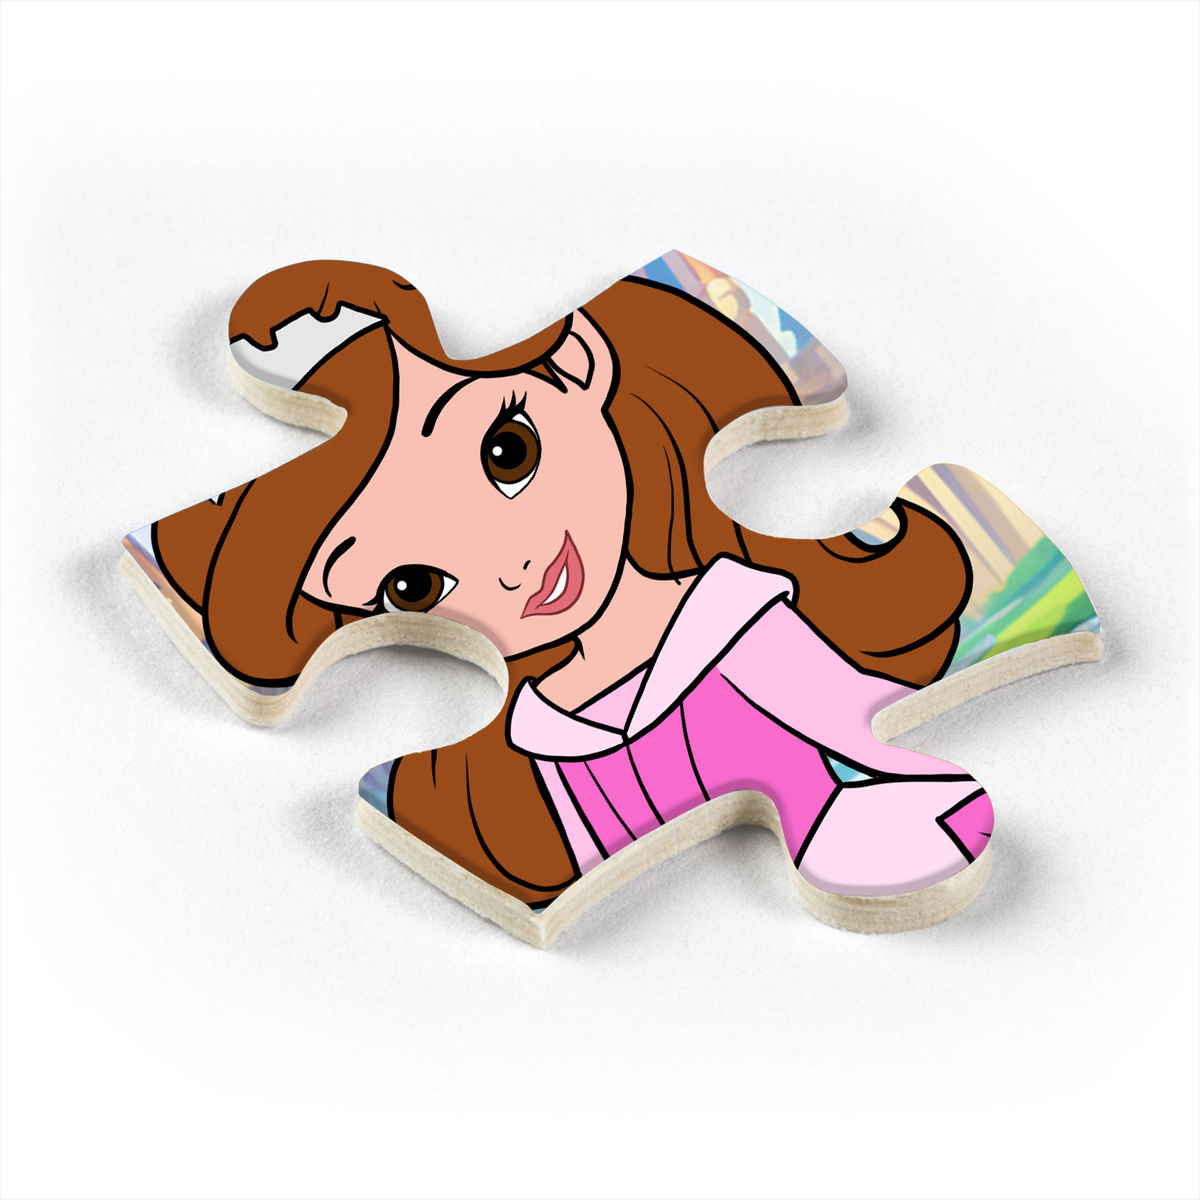 Personalized Puzzle - Jigsaw Puzzle Personalized - Personalized Princess Puzzle - Gift for Kids - Christmas Gift 2023 - Trendy 2023 (58115)_6